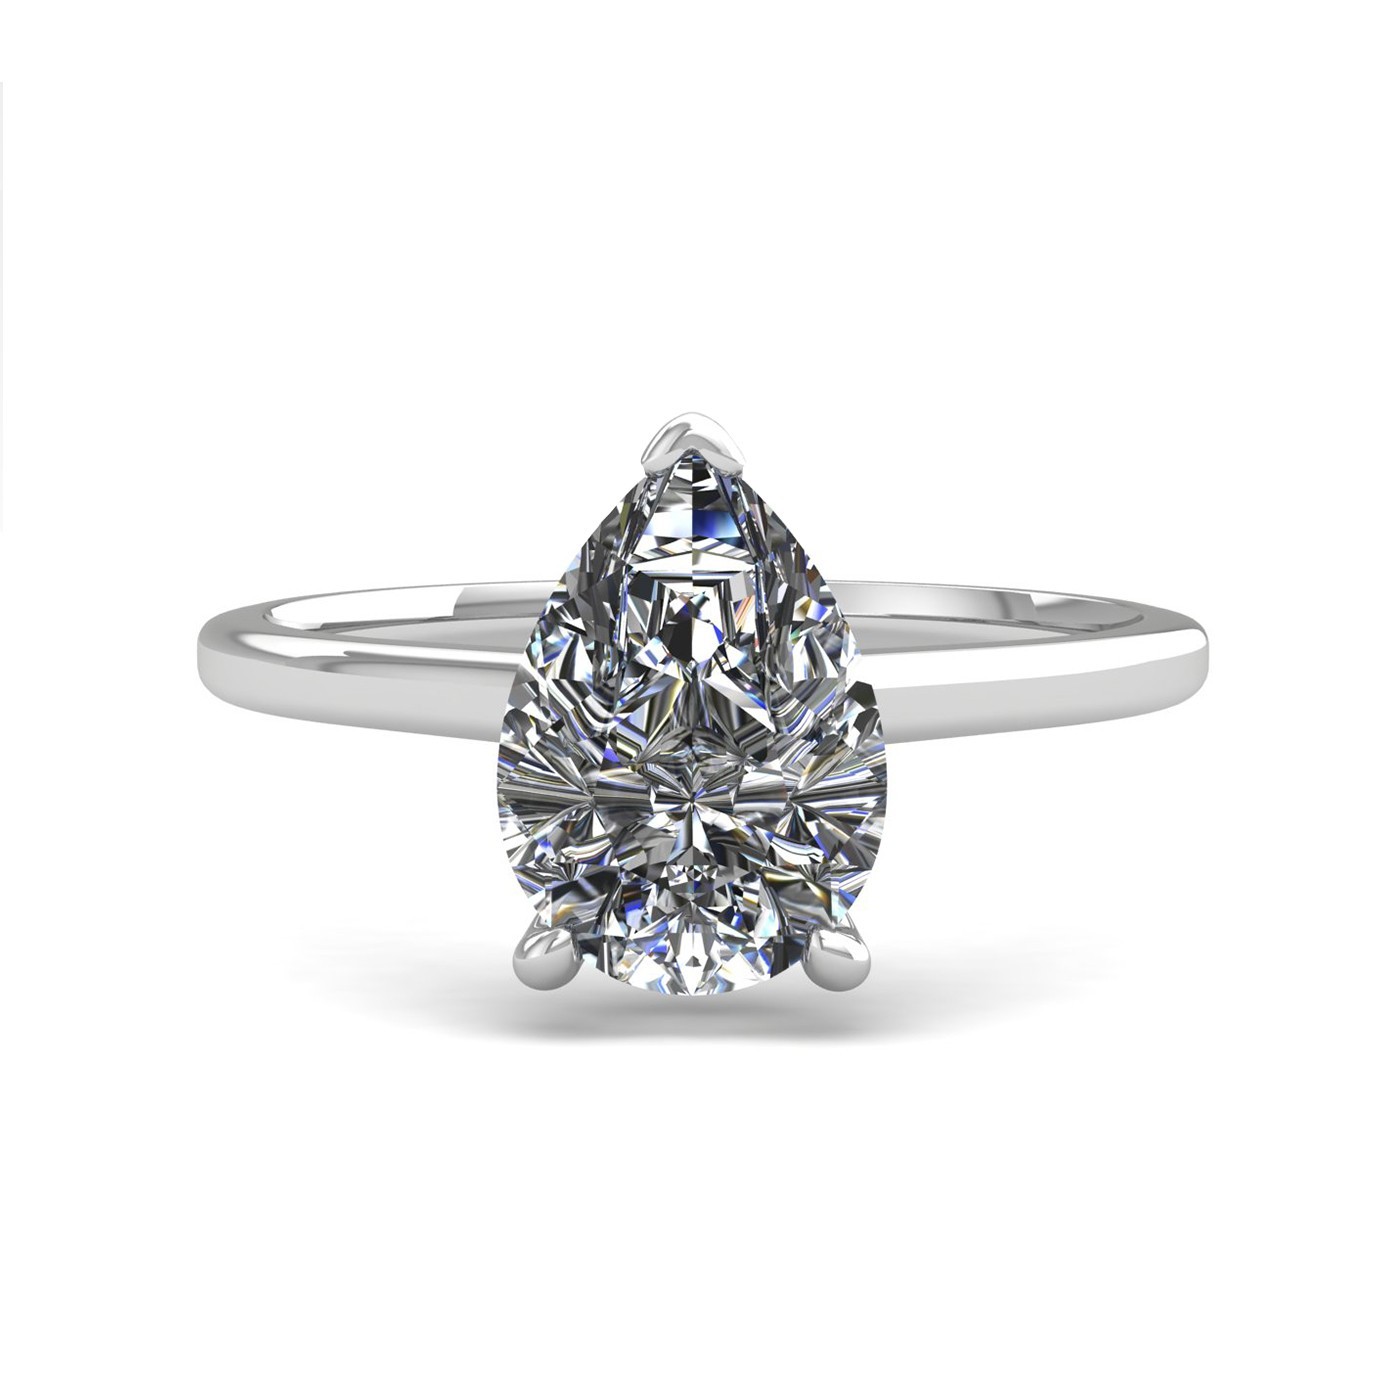 18k white gold  2,00 ct 3 prongs solitaire pear cut diamond engagement ring with whisper thin band Photos & images